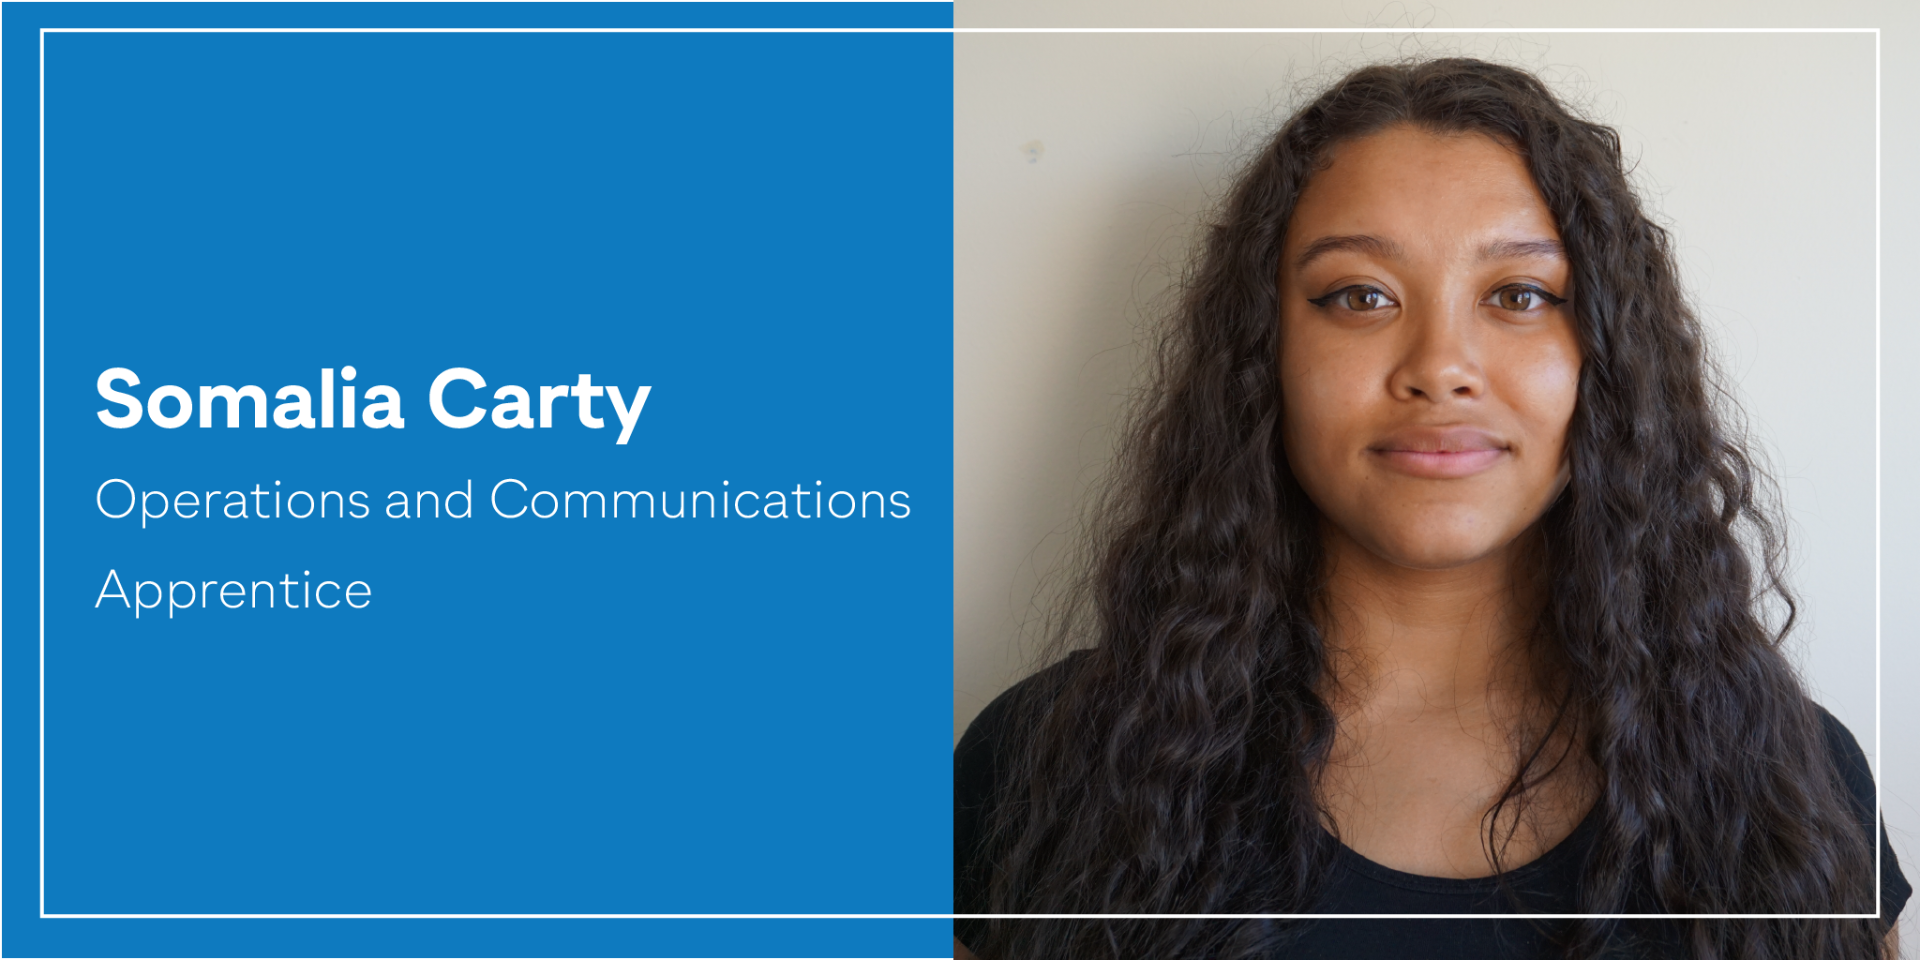 Somalia Carty - Operations and Communications Apprentice